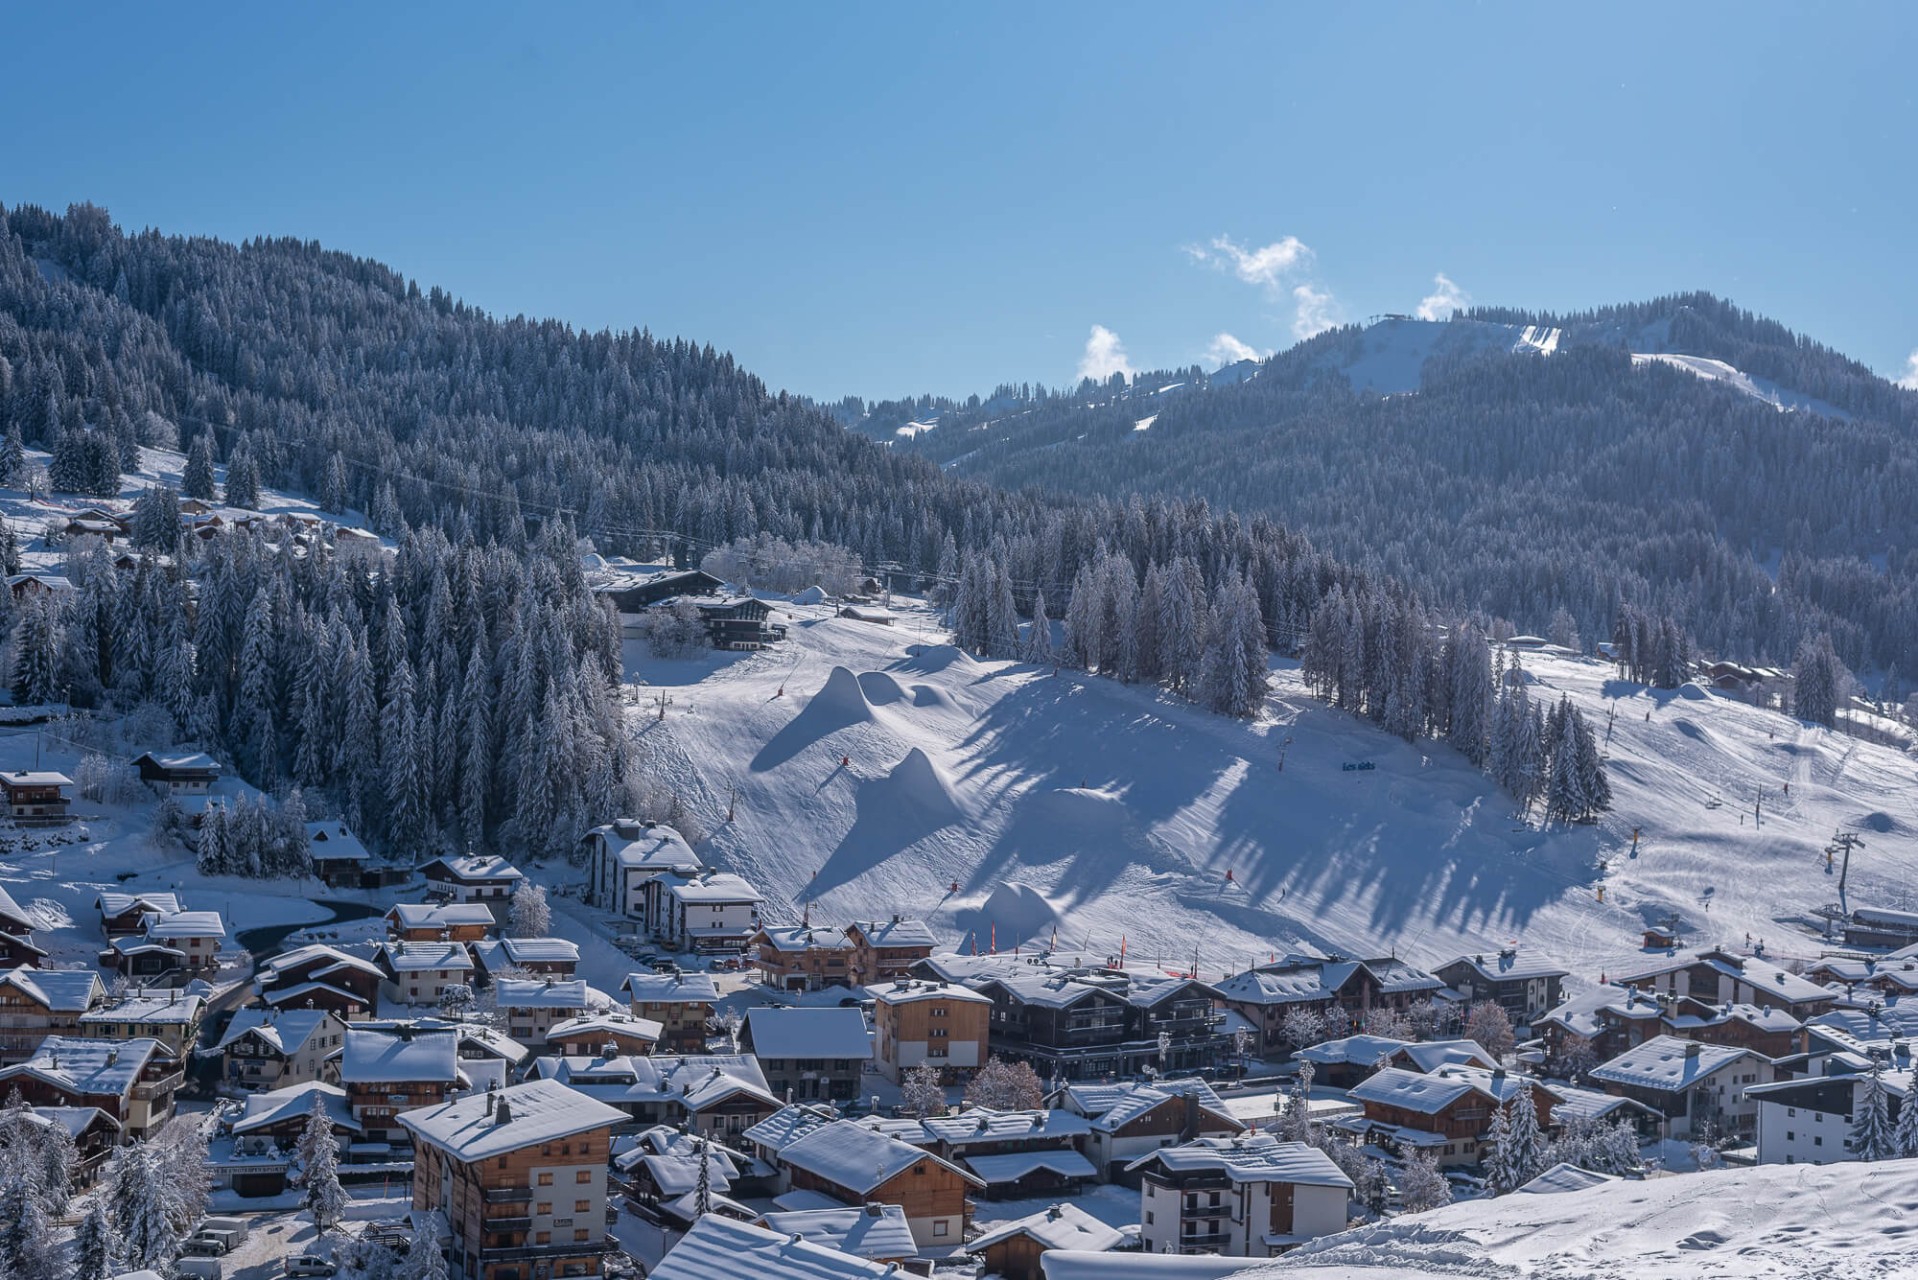 What to do on holiday in Les Gets without ski lifts this winter?